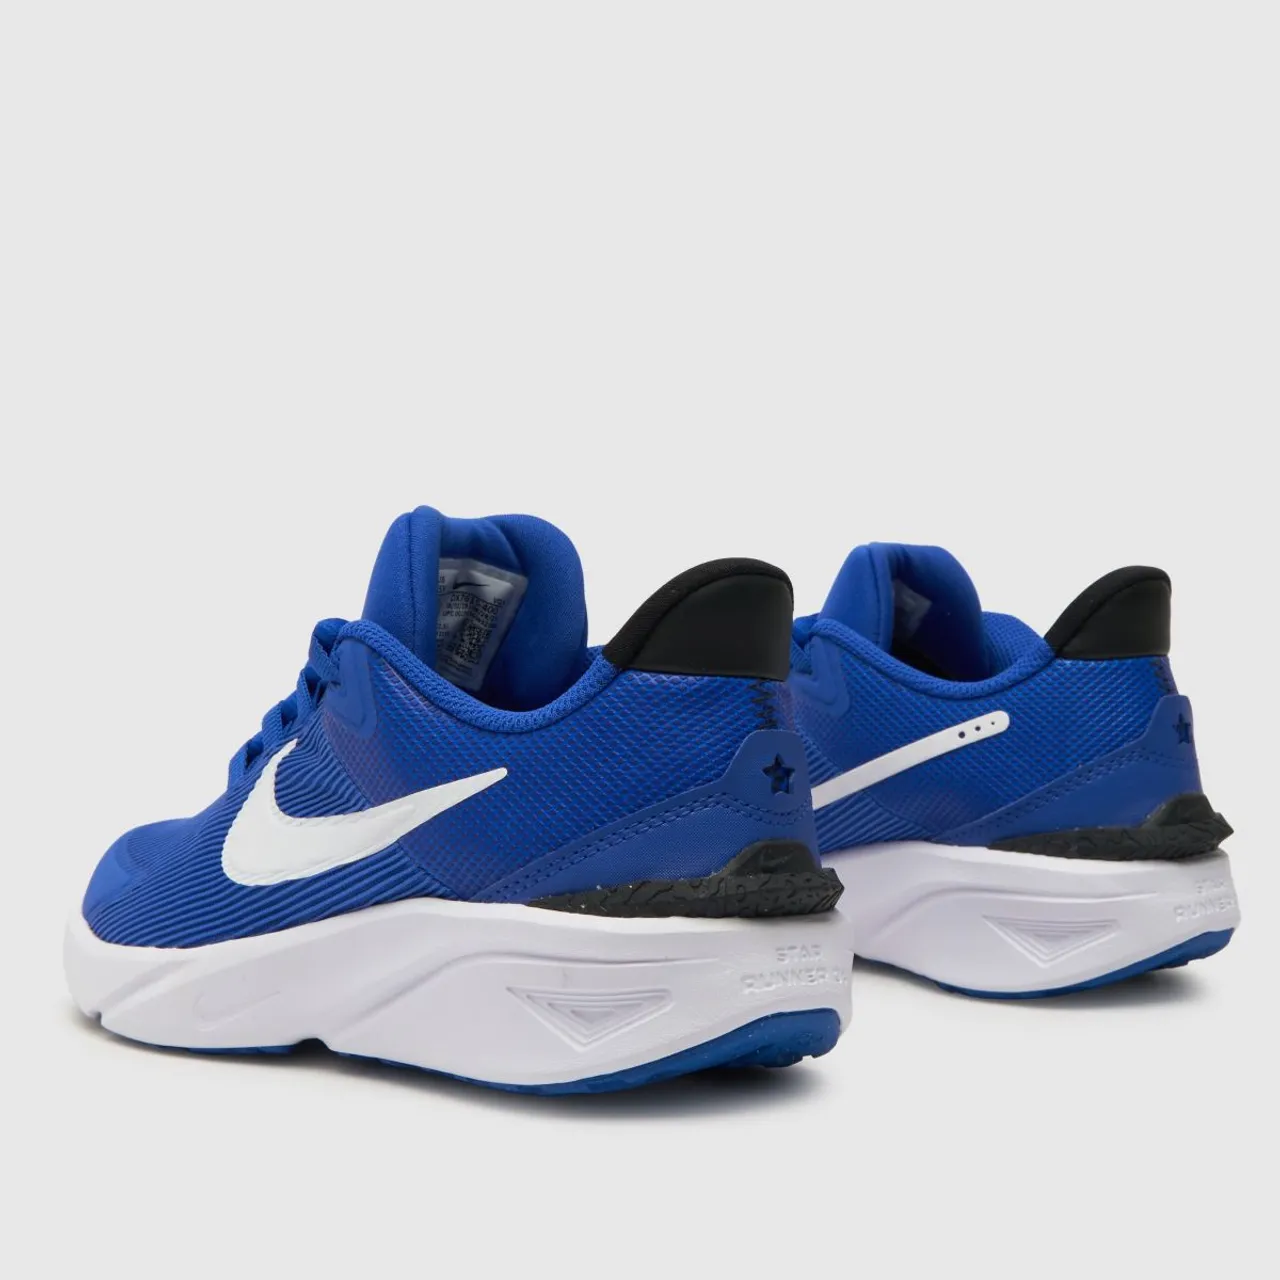 Nike Blue Star Runner 4 Boys Youth Trainers